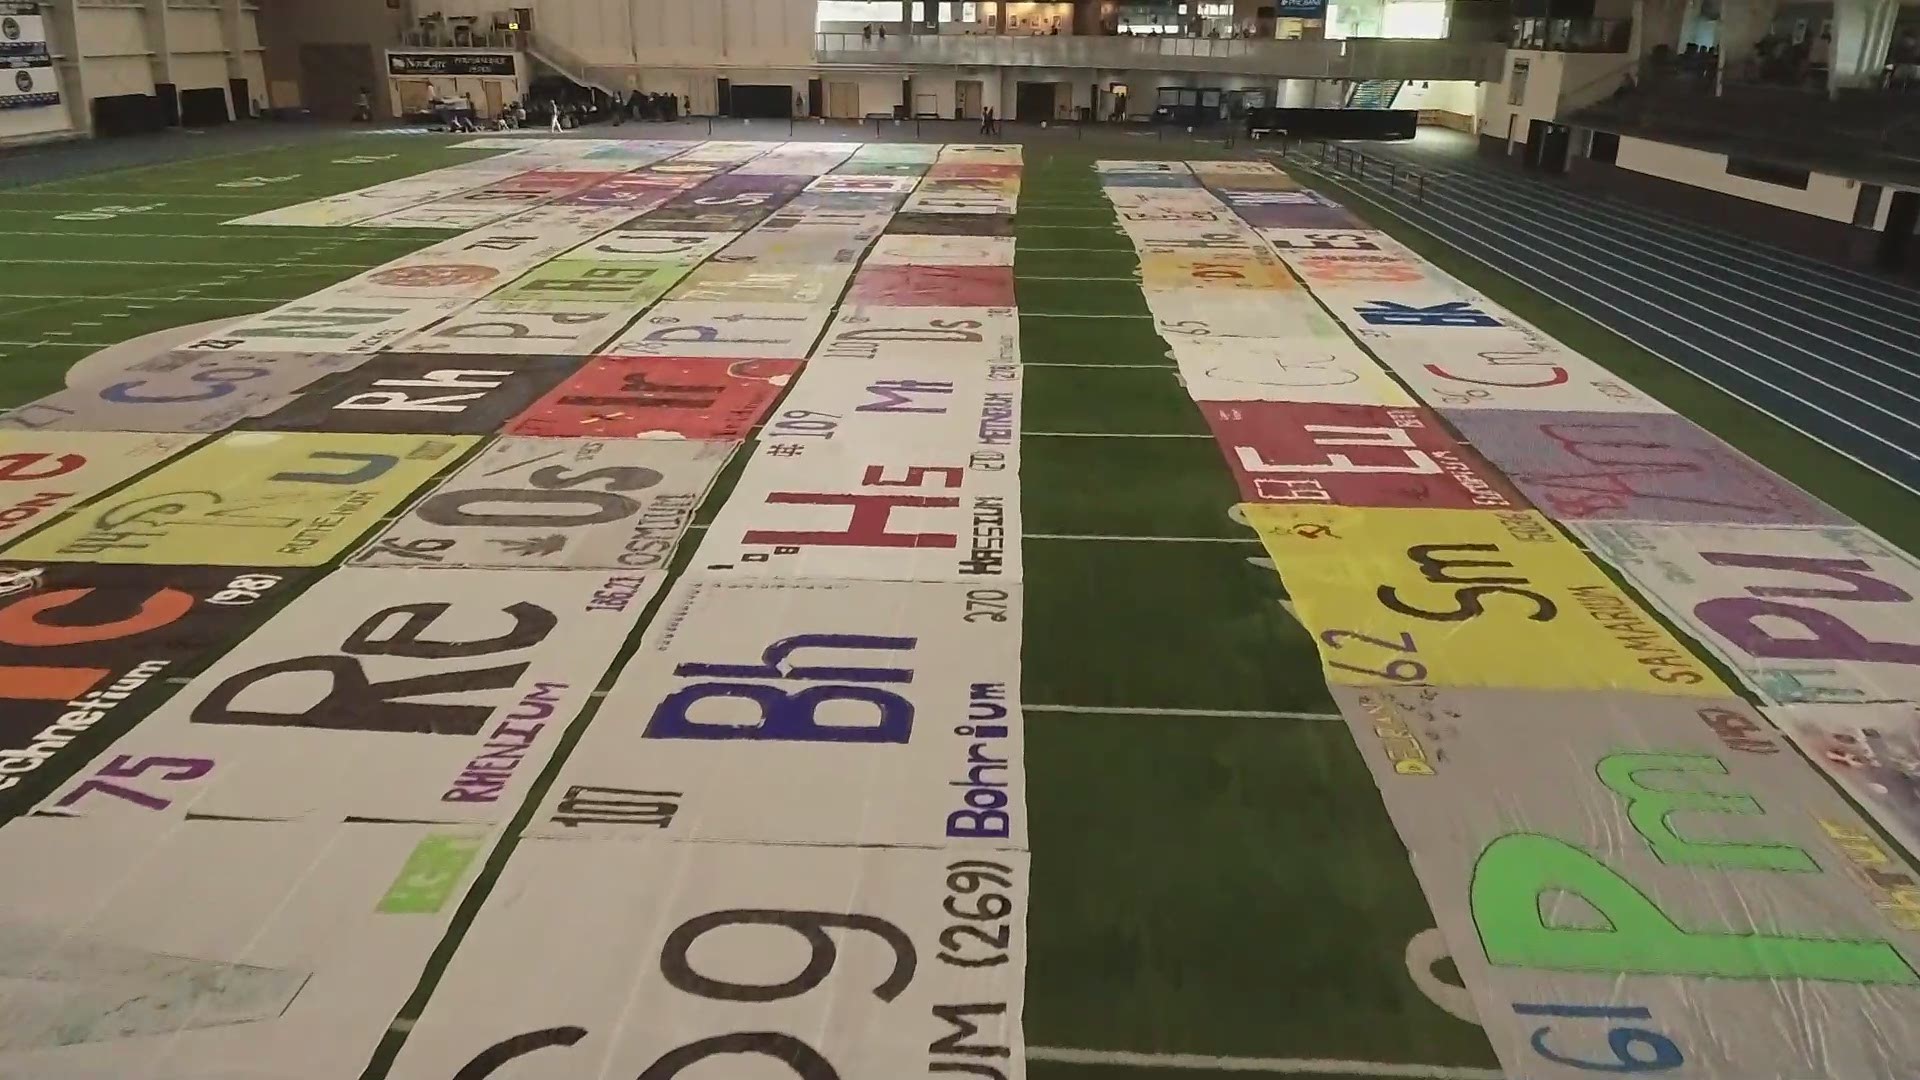 An overheard view of the attempt at creating the world's largest periodic table at Grand Valley State University. Video courtesy: GVSU.